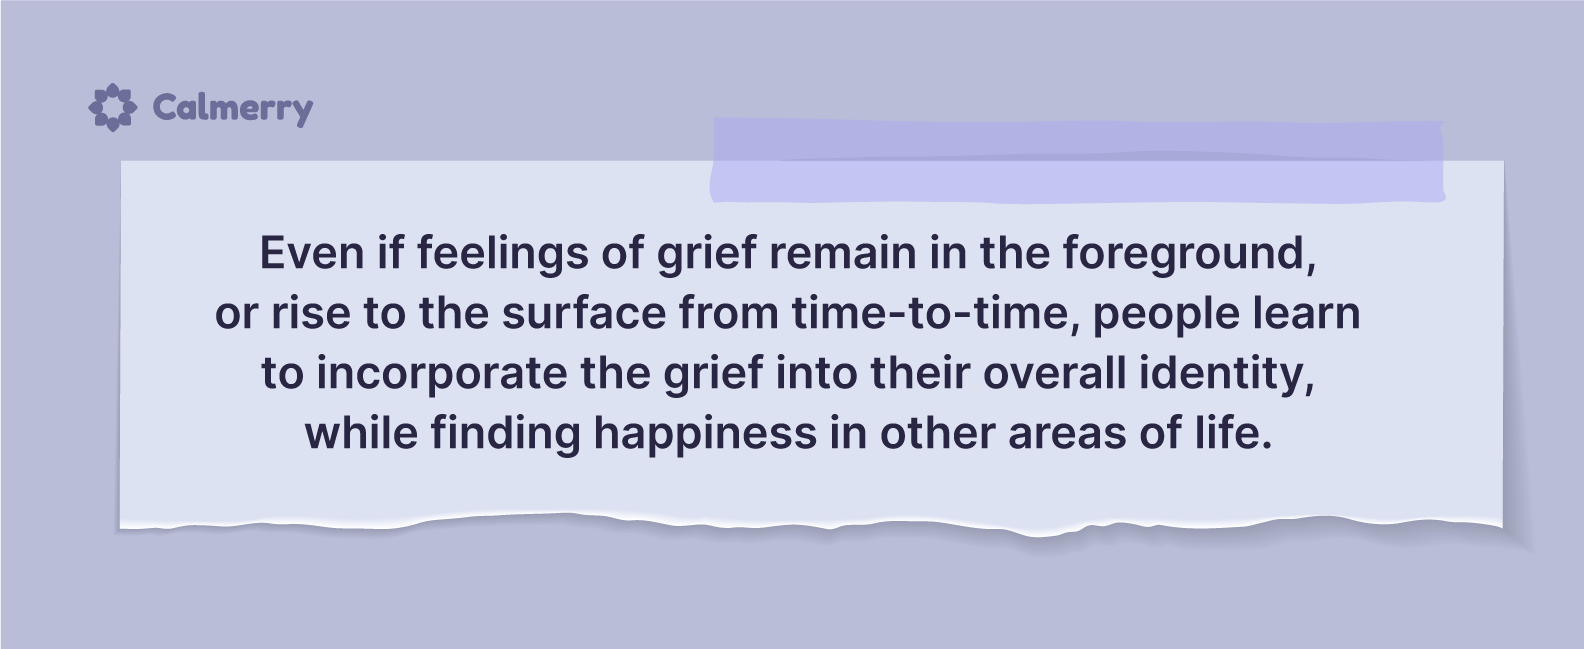 people learn to incorporate the grief into their overall identity